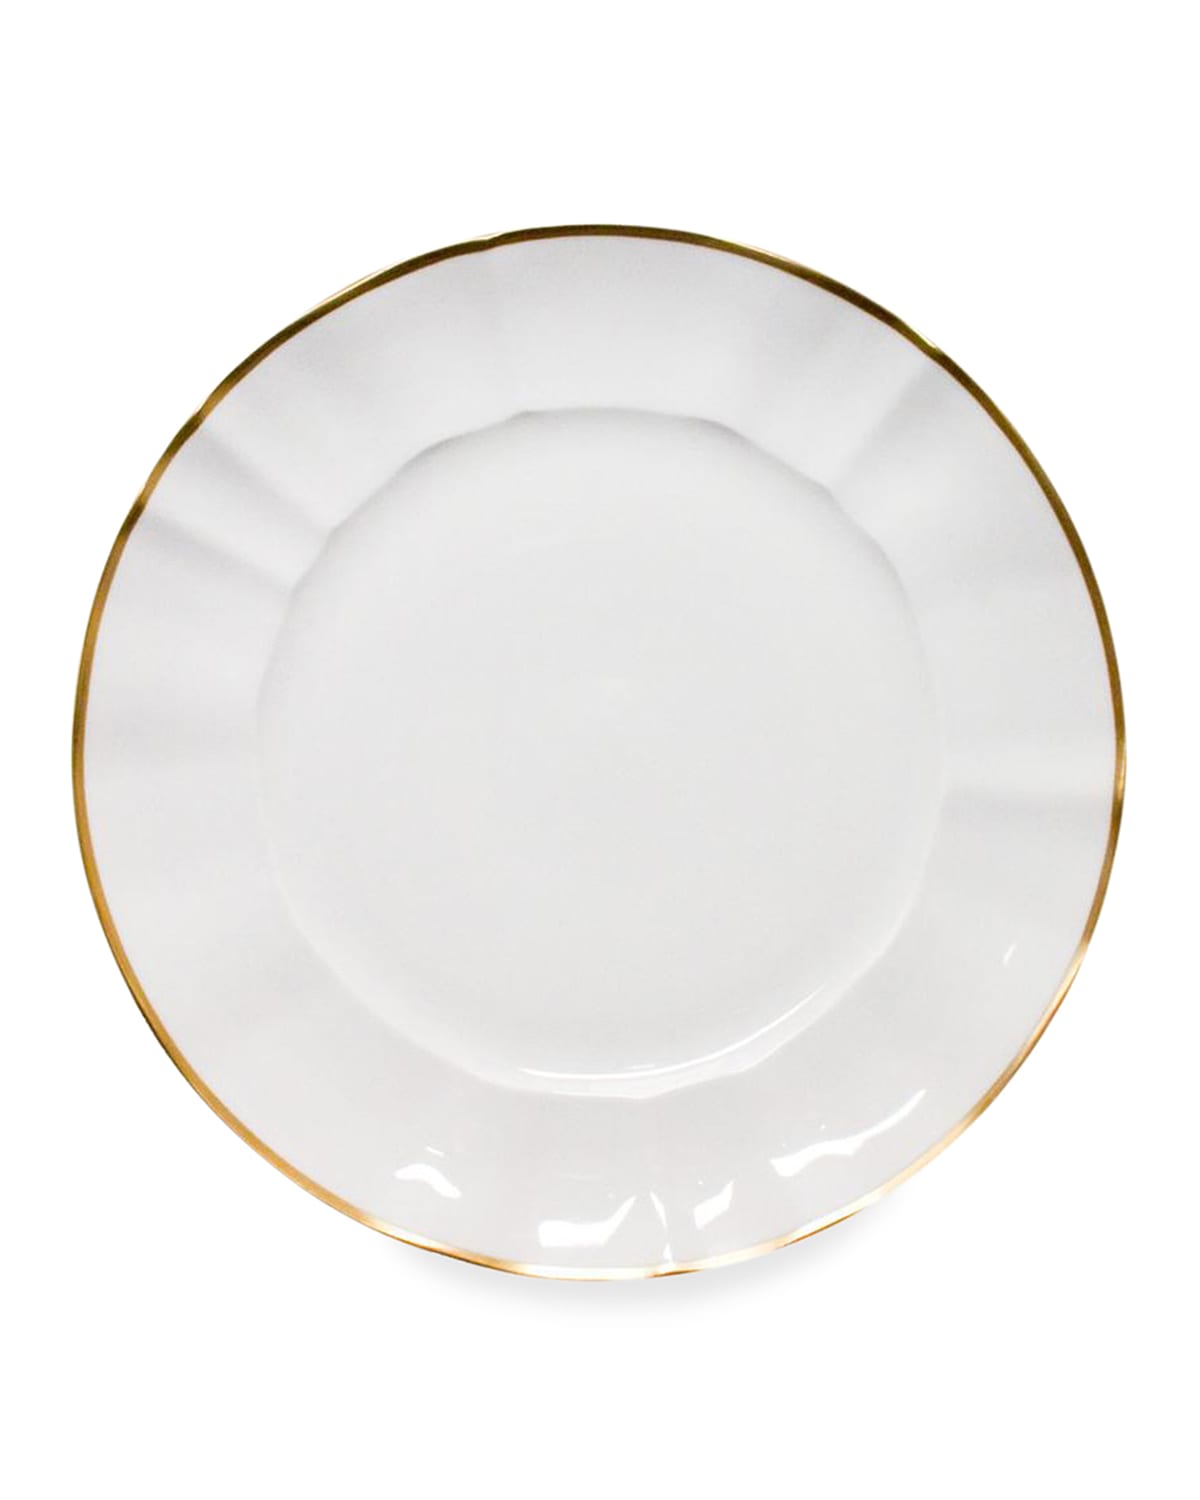 White Charger Plate with Gold Border